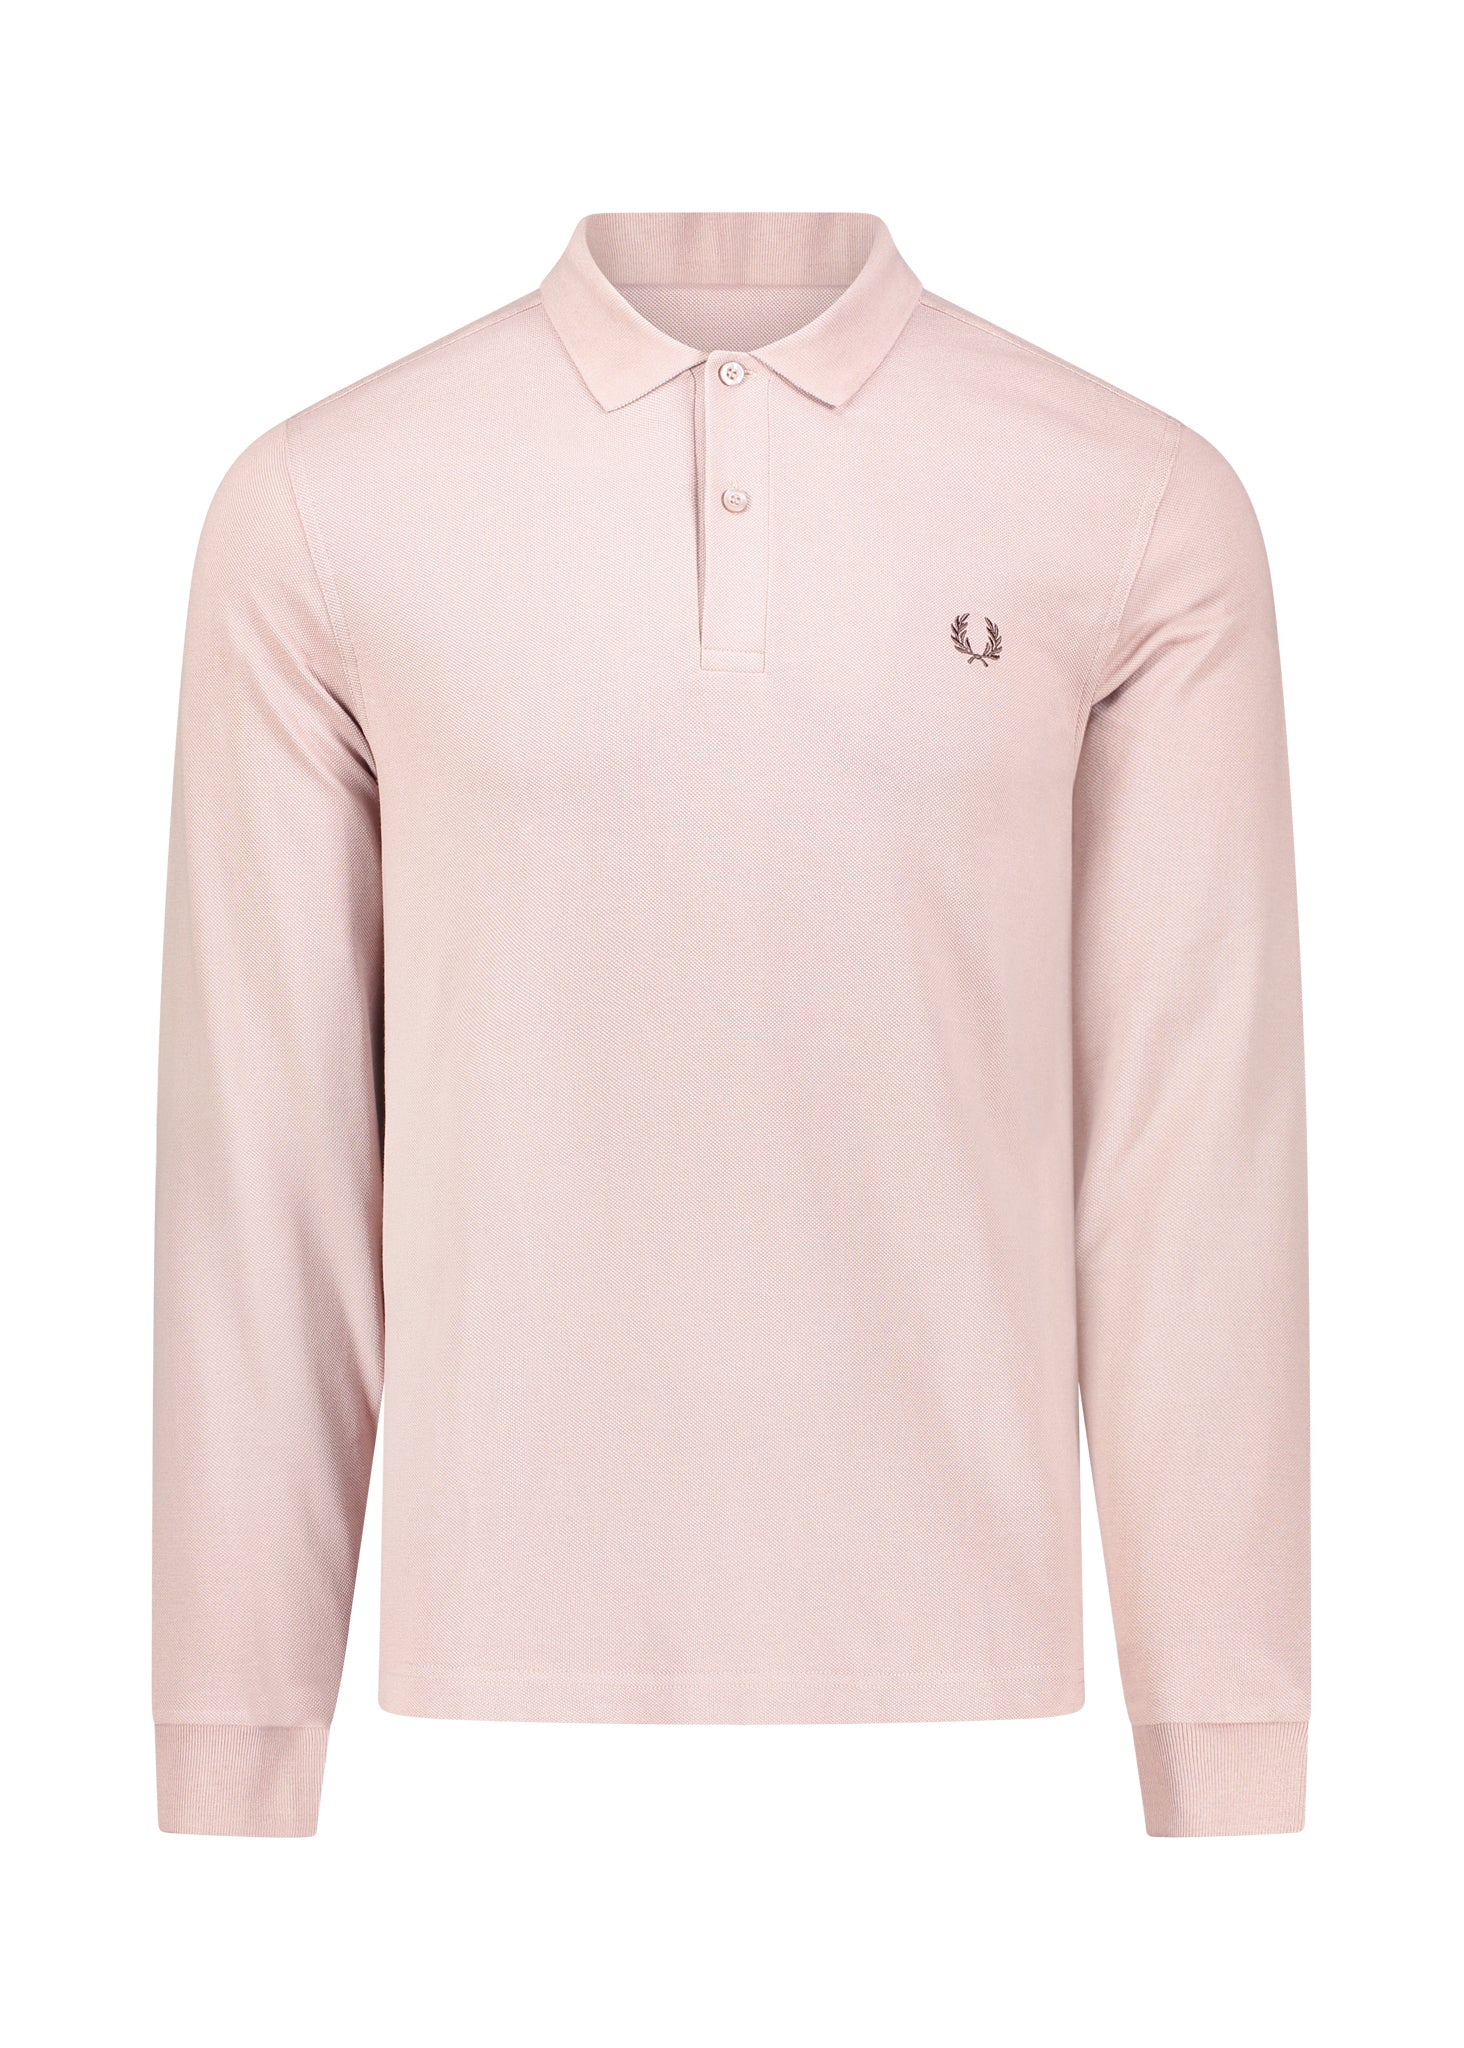 Fred Perry LS Polo Shirt - Plain Dark Pink